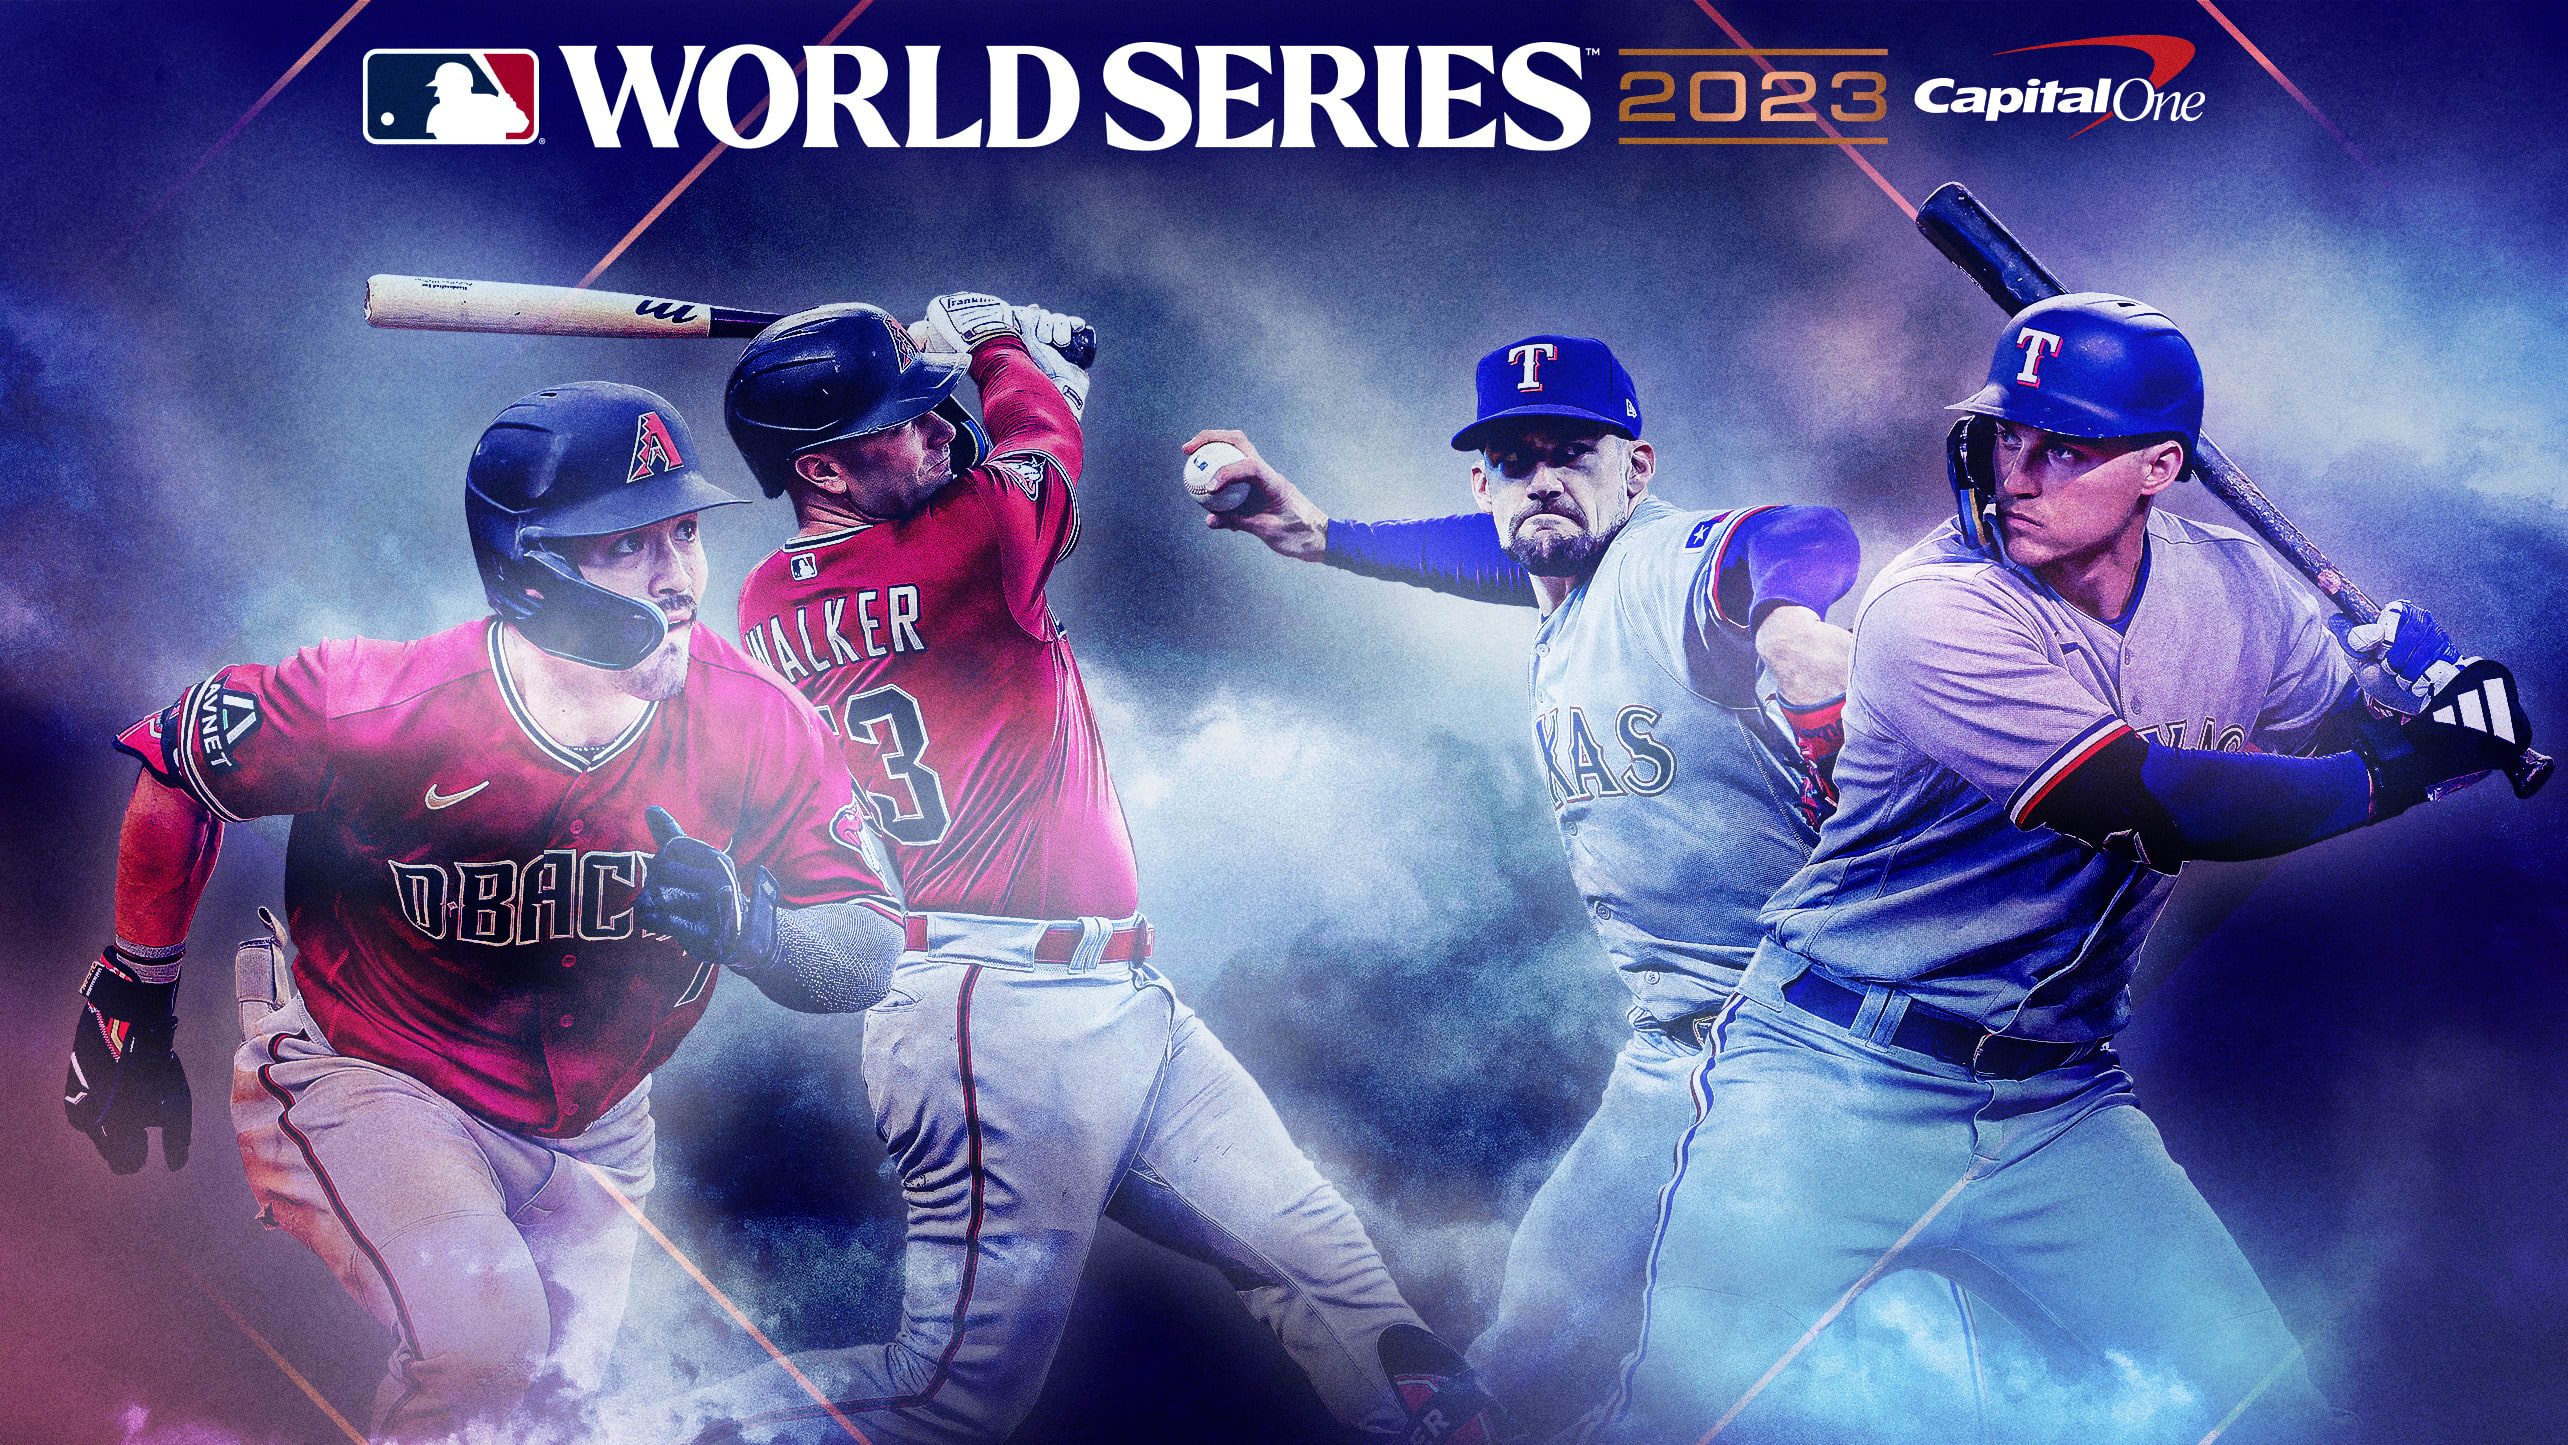 Corbin Carroll, Christian Walker, Nathan Eovaldi and Corey Seager are pictured beneath the World Series logo